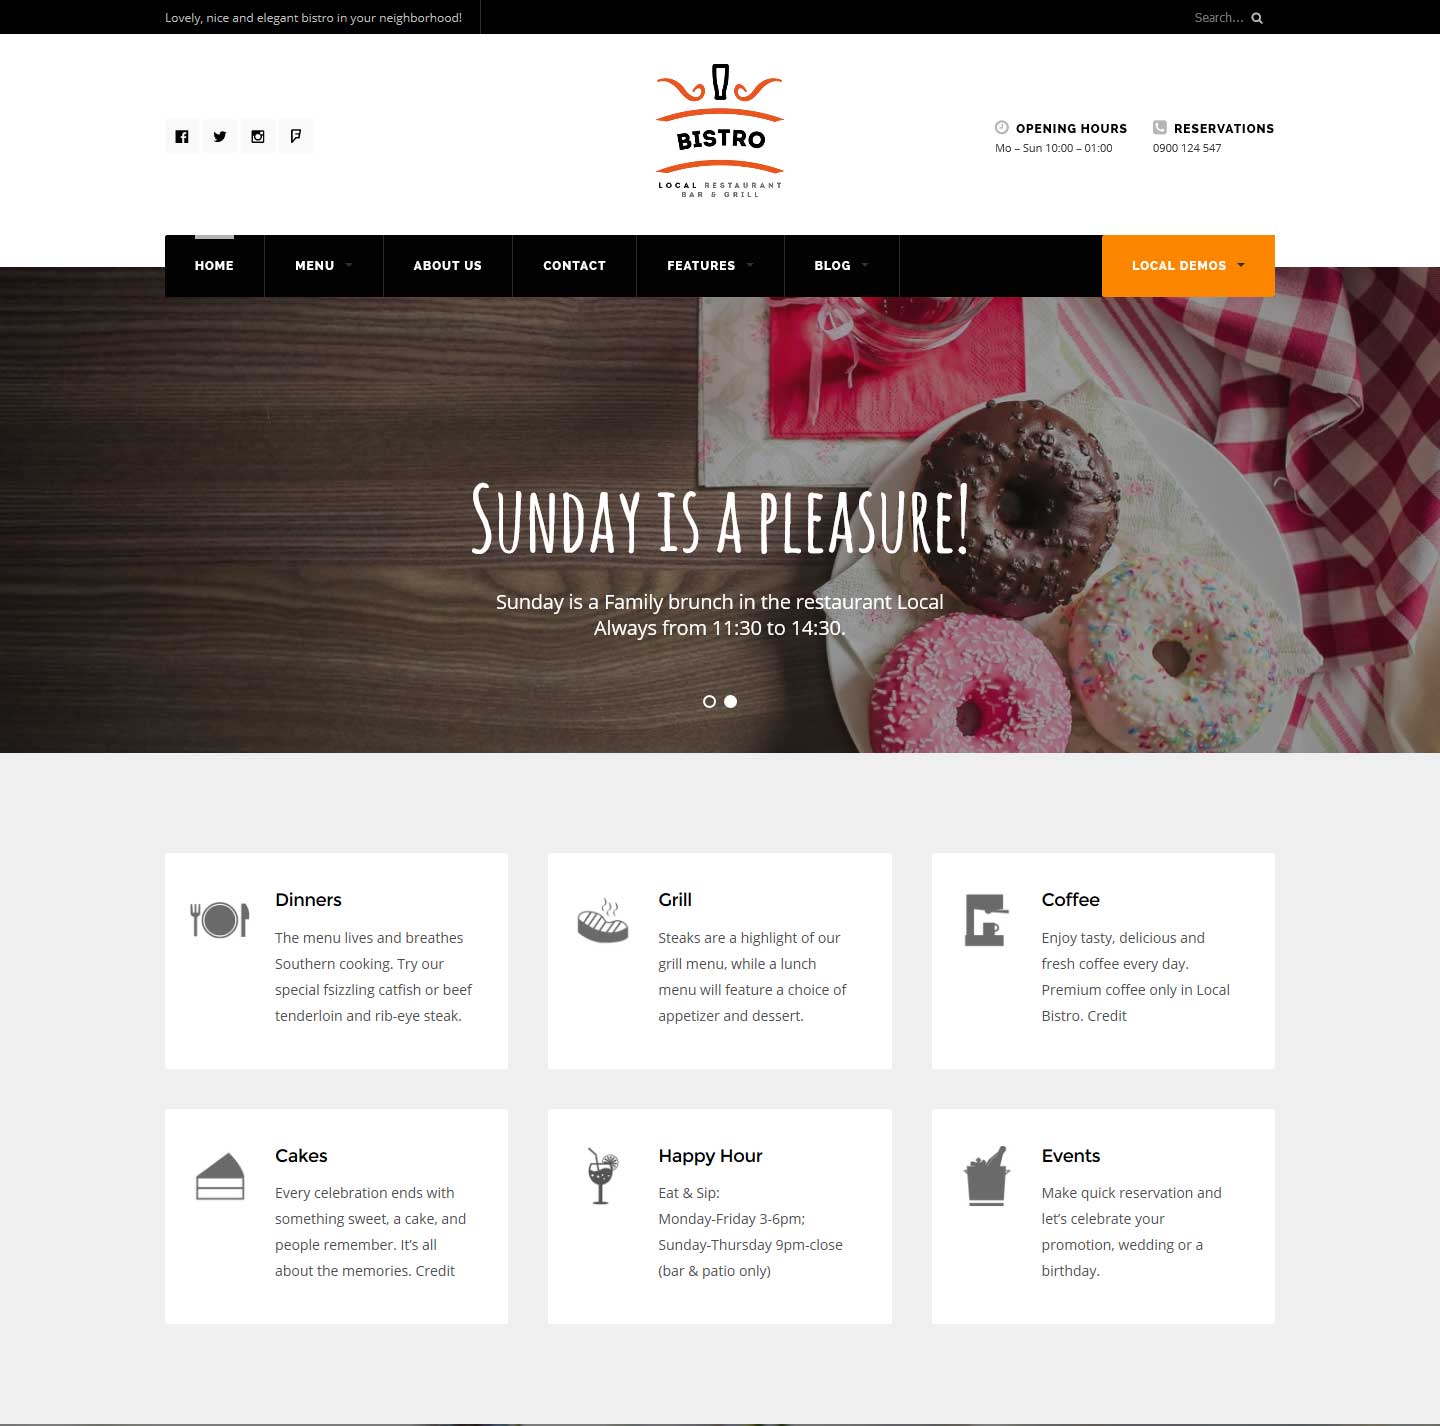 Local Business - WP Theme for Small Businesses